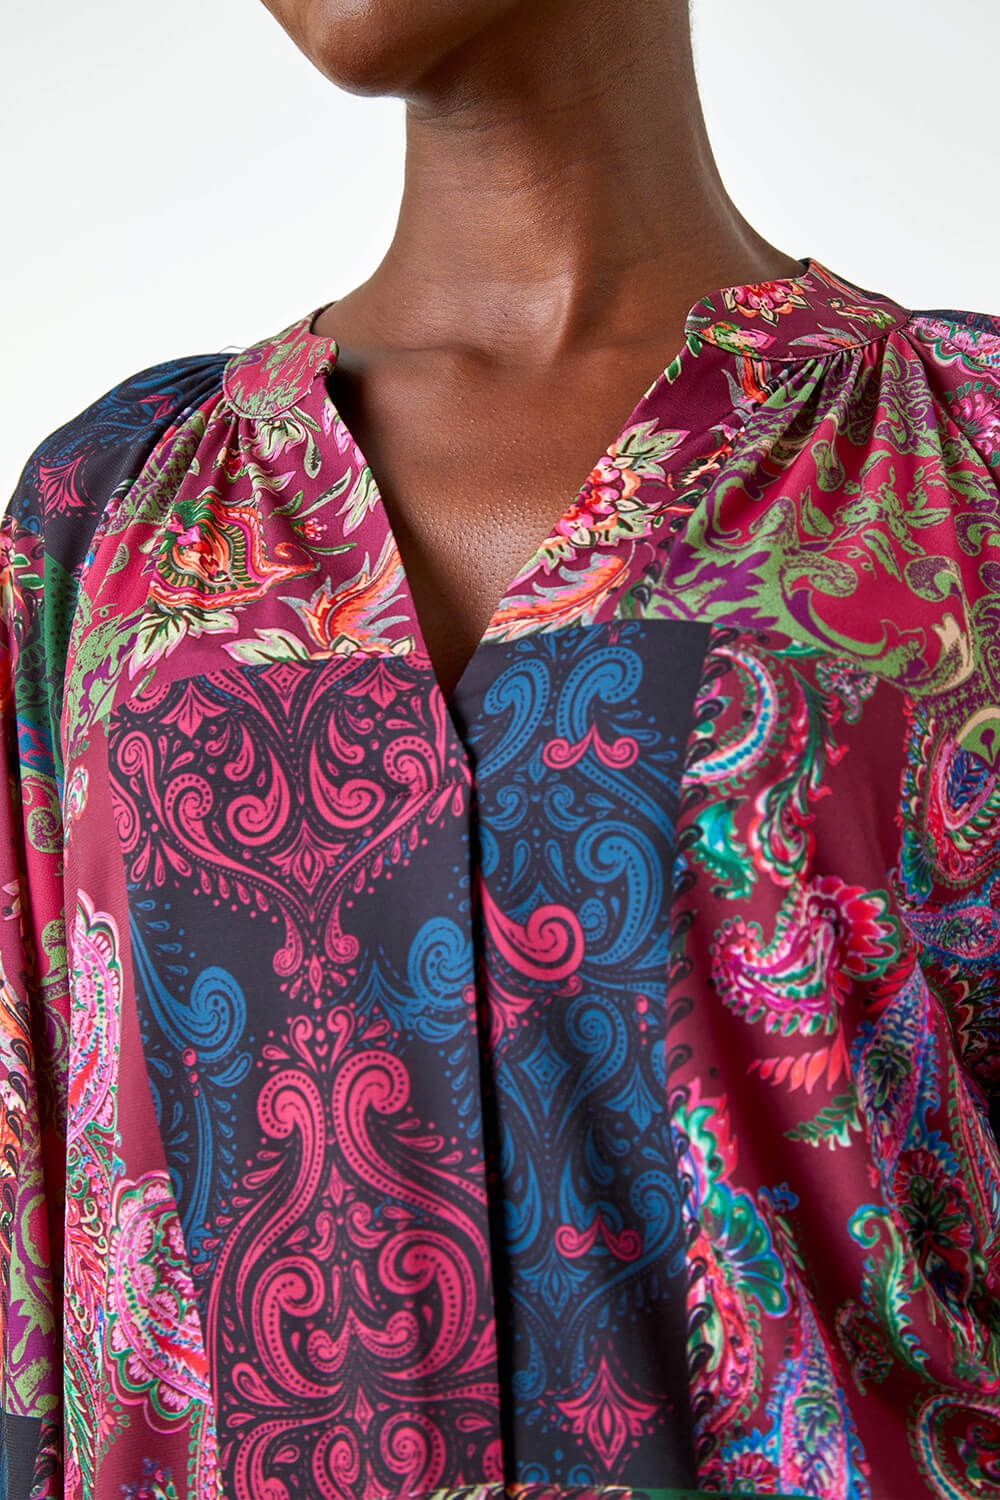 Red Patchwork Print Stretch Jersey Shirt, Image 5 of 5